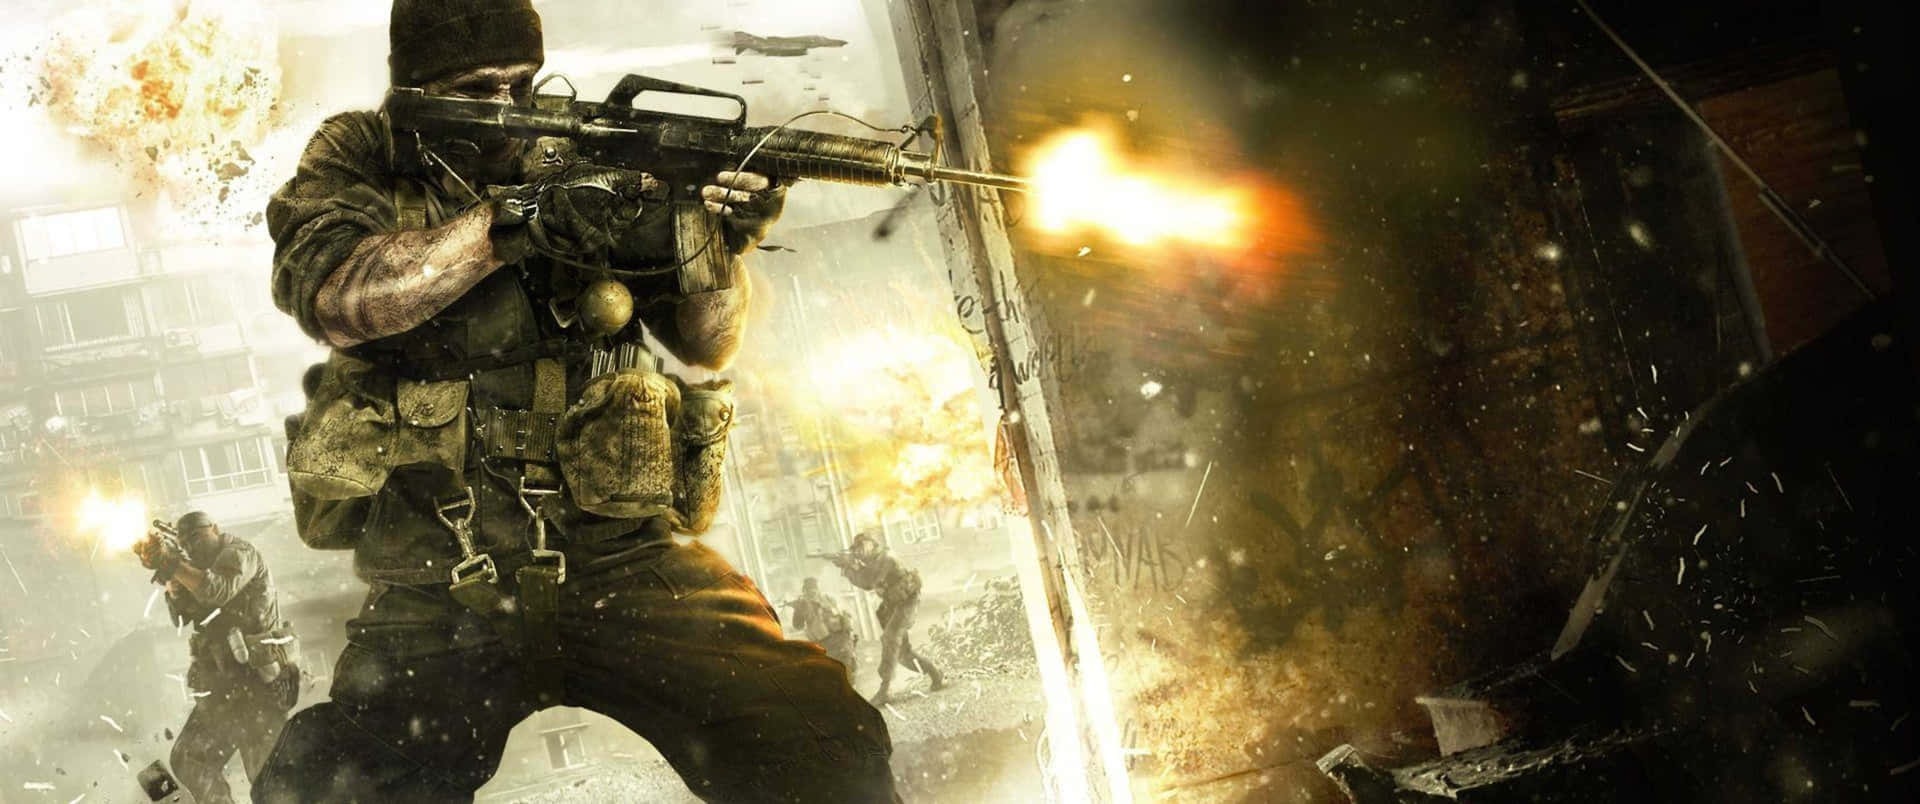 Call Of Duty Black Ops 2 Hd Wallpapers